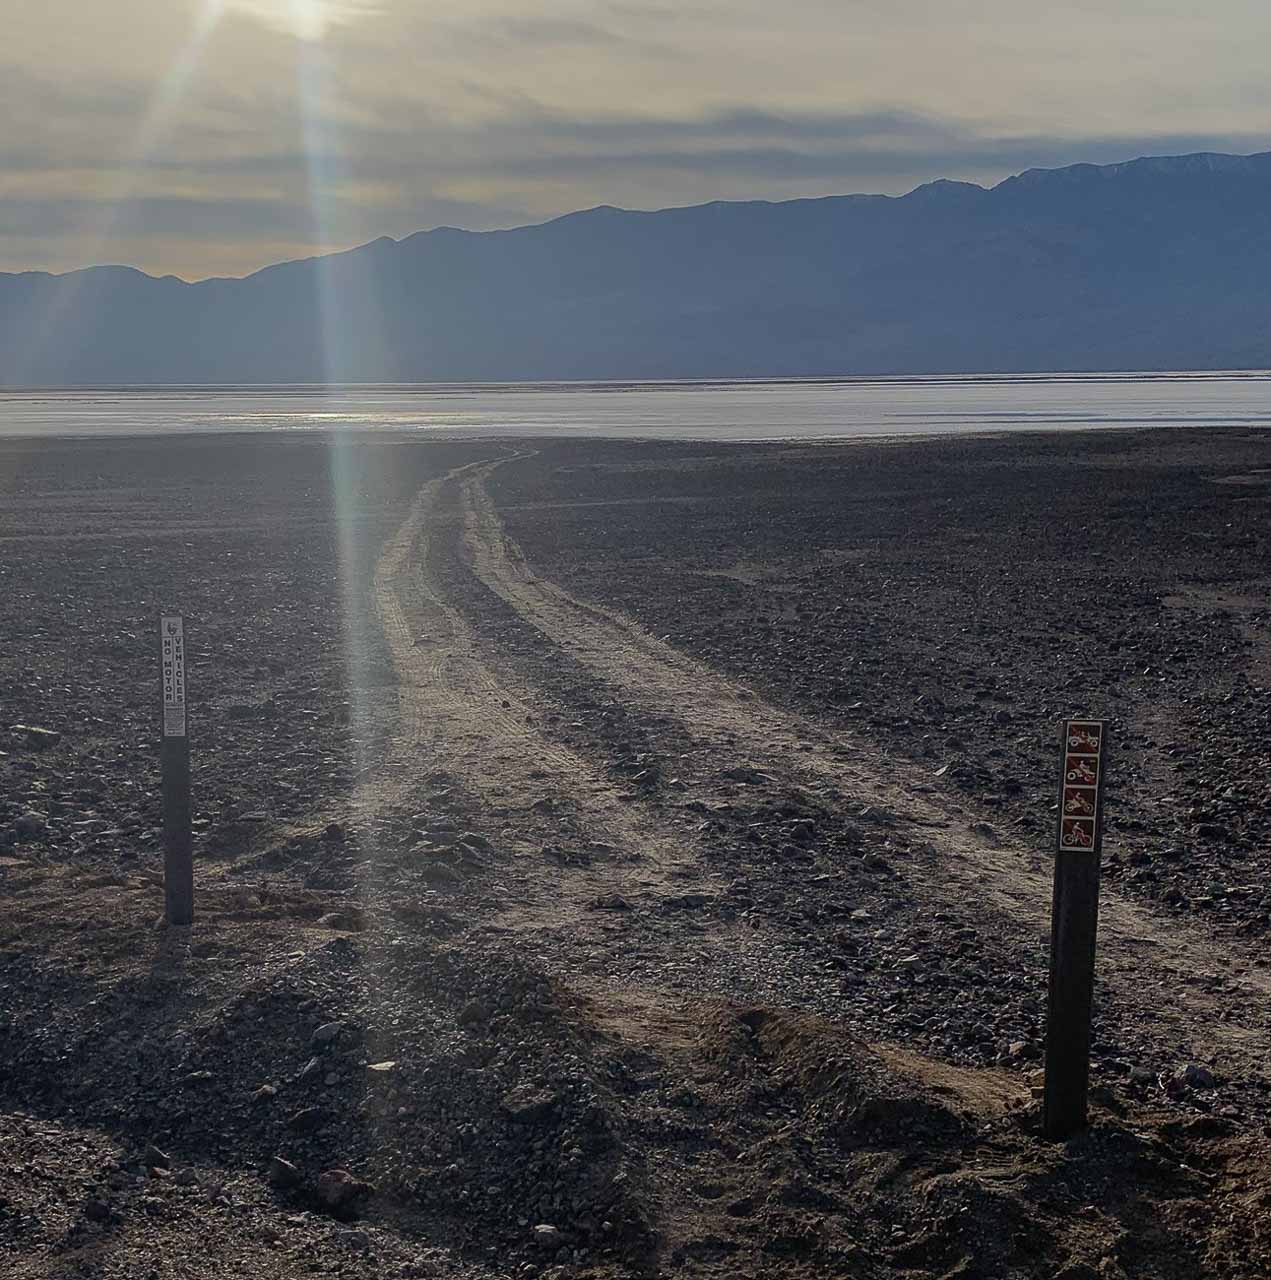 Signs warning about illegal off roading in Death Valley National Park - Image credit: NPS / S. Solomon